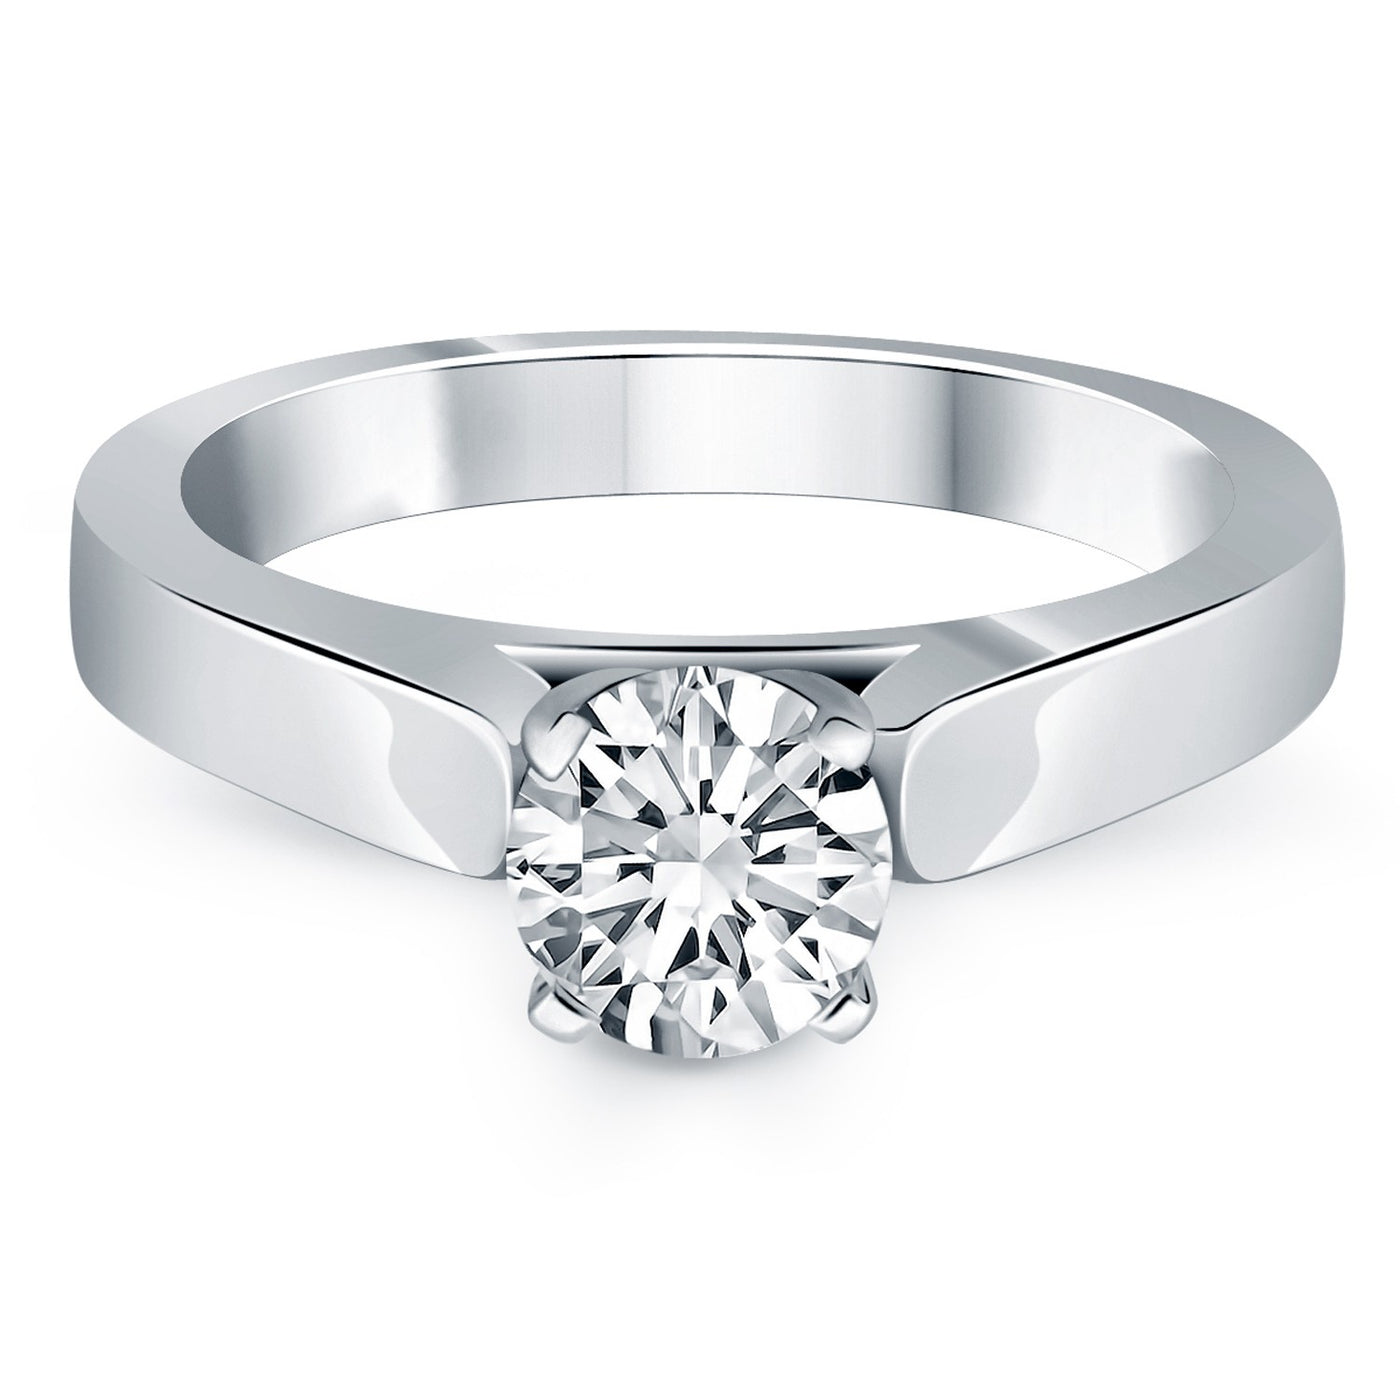 14k White Gold Wide Cathedral Solitaire Engagement Ring